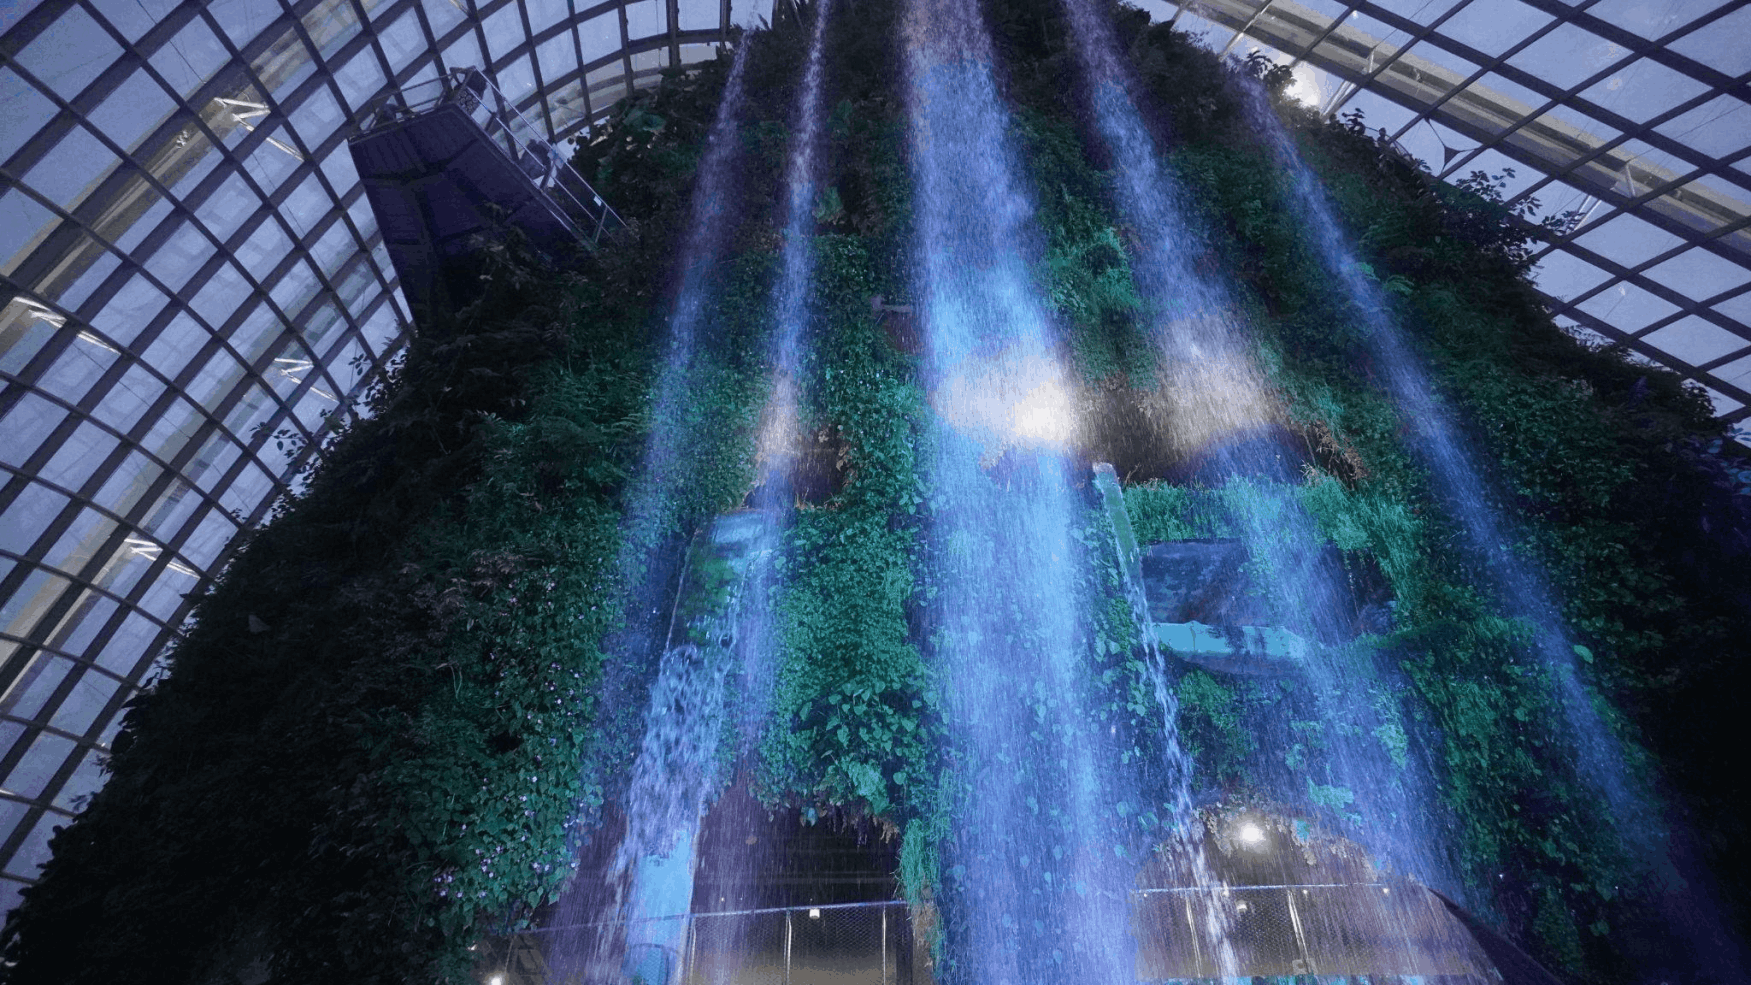 Gardens by the bay Singapore Avatar Experience